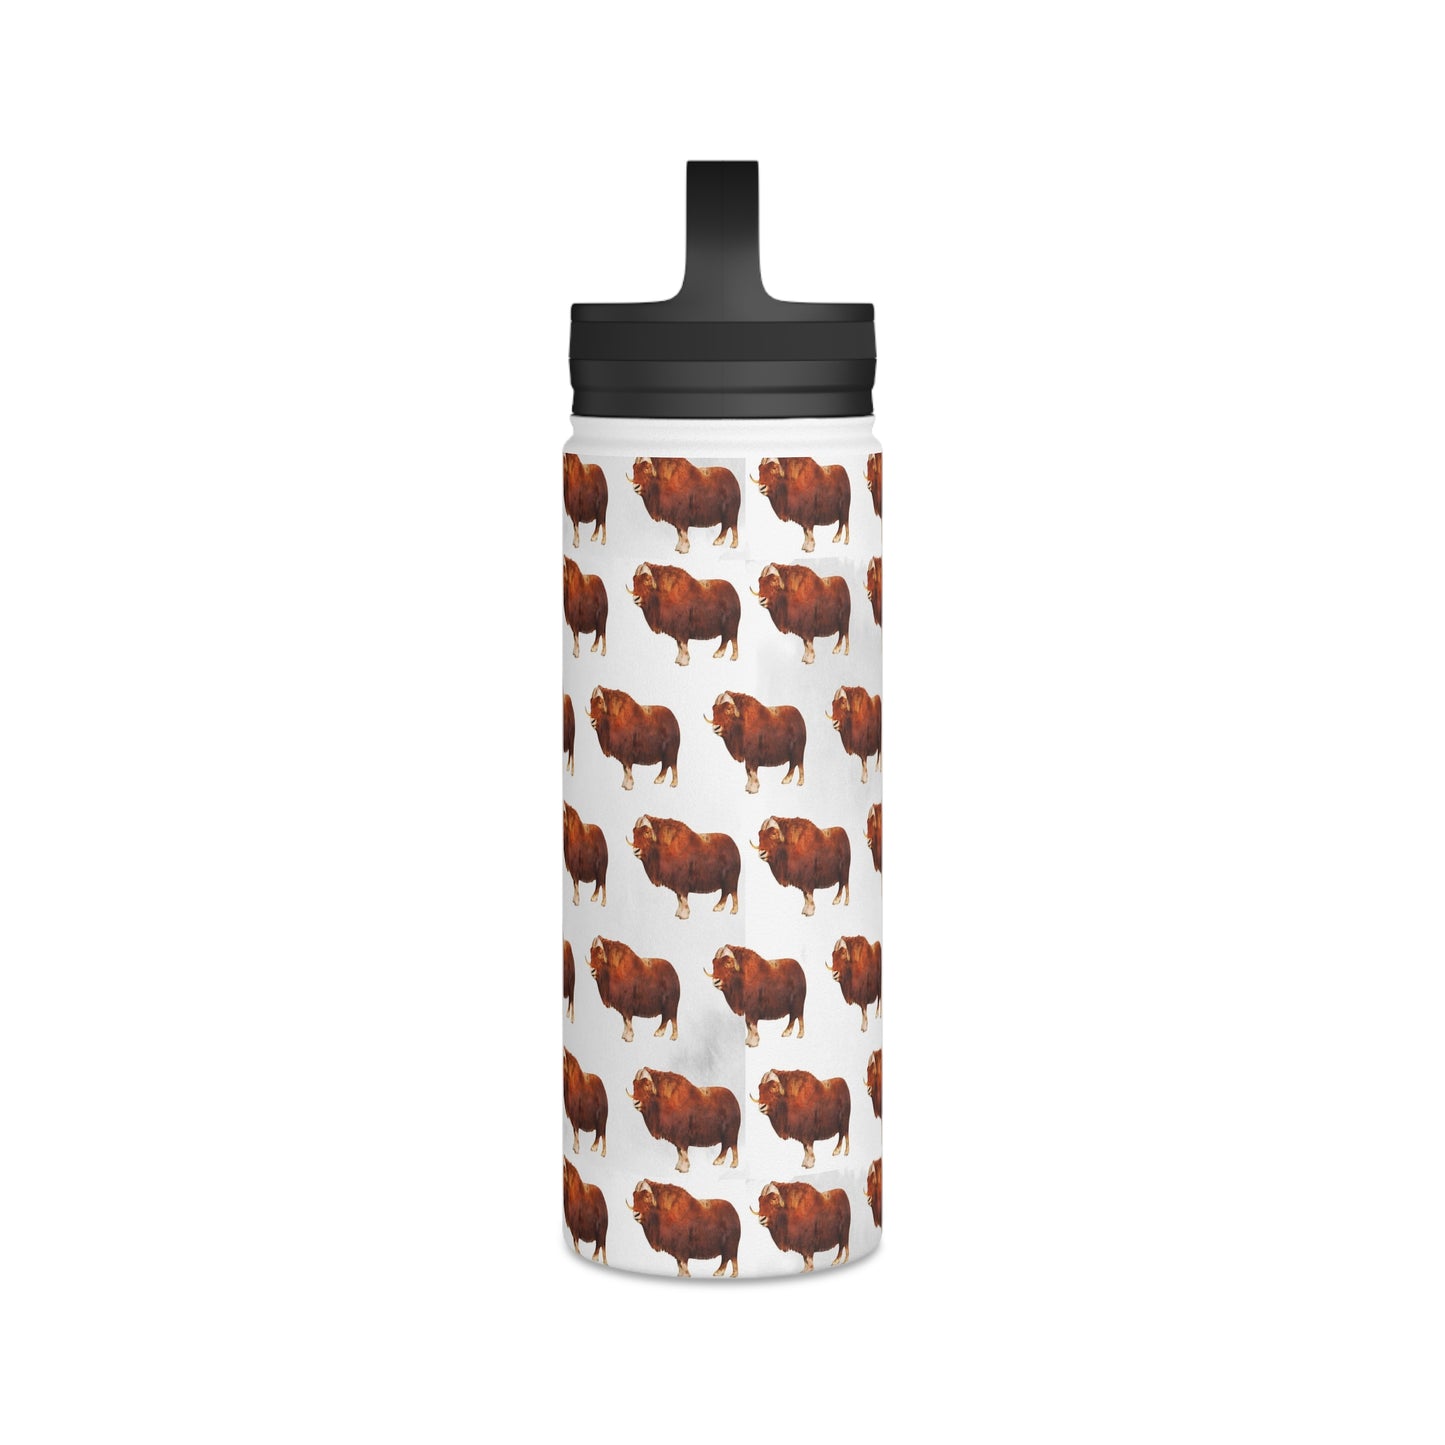 Back To School Animals Stainless Steel Water Bottle, Handle Lid